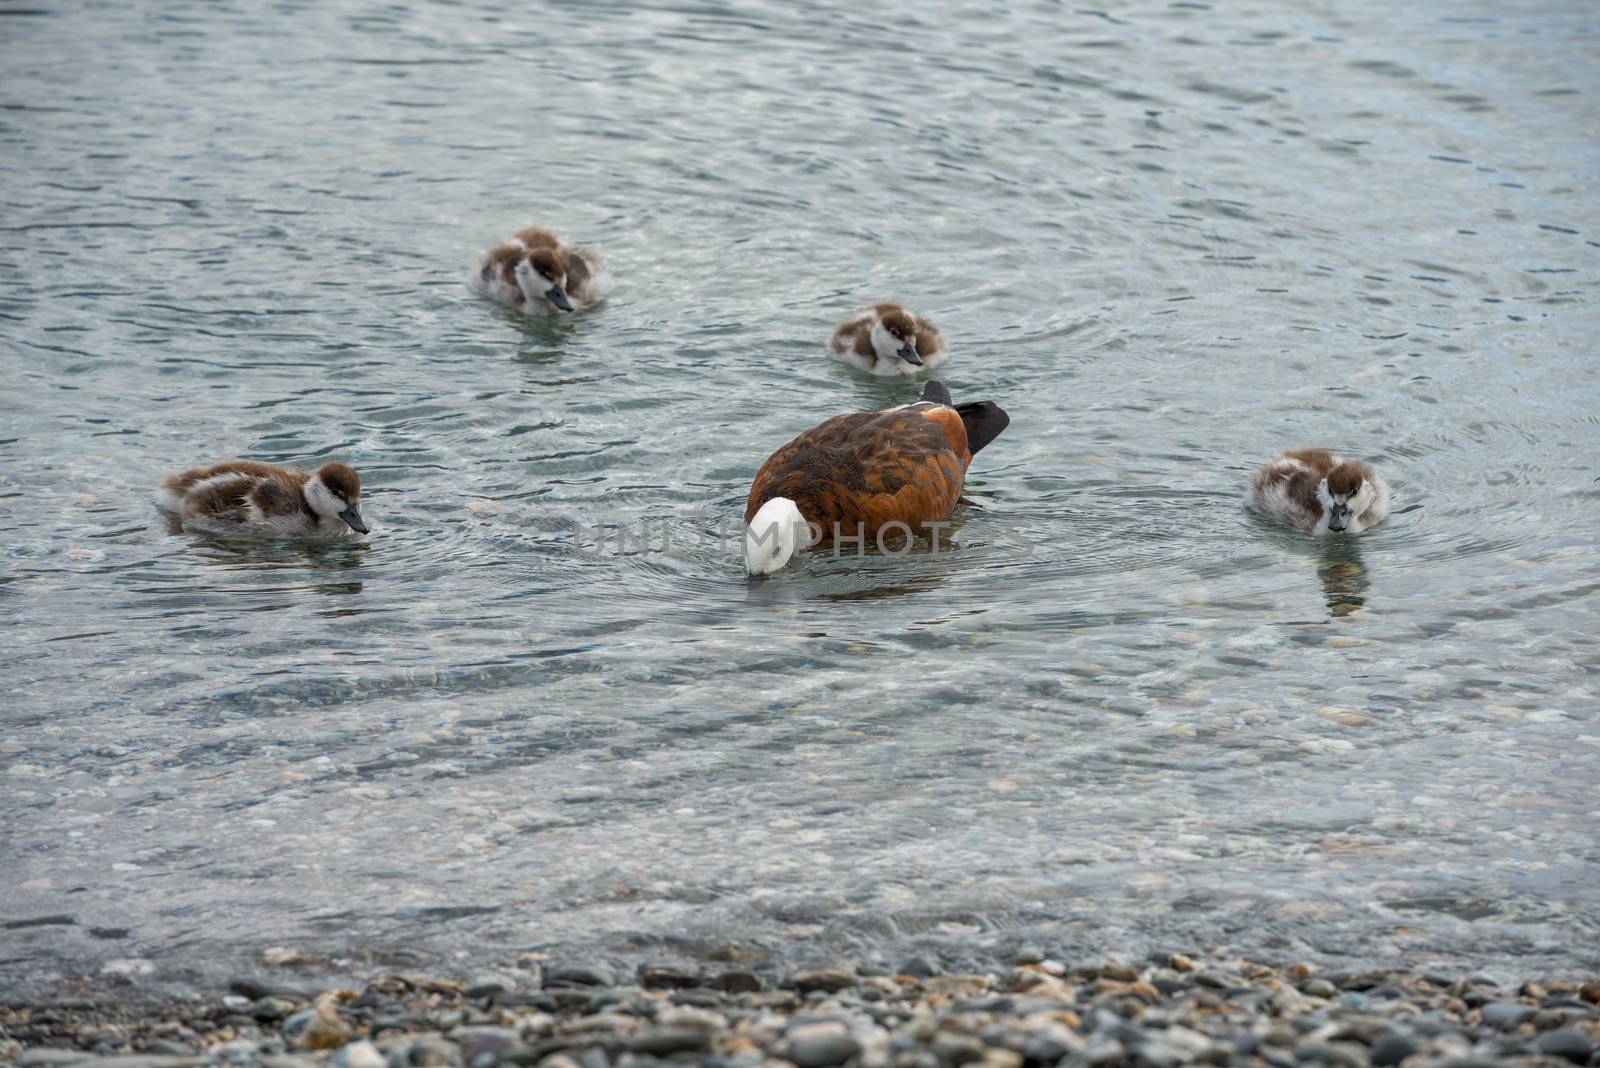 Mother duck is teaching her ducklings how to find food in the shallow water of Lake Wakatipu, New Zealand